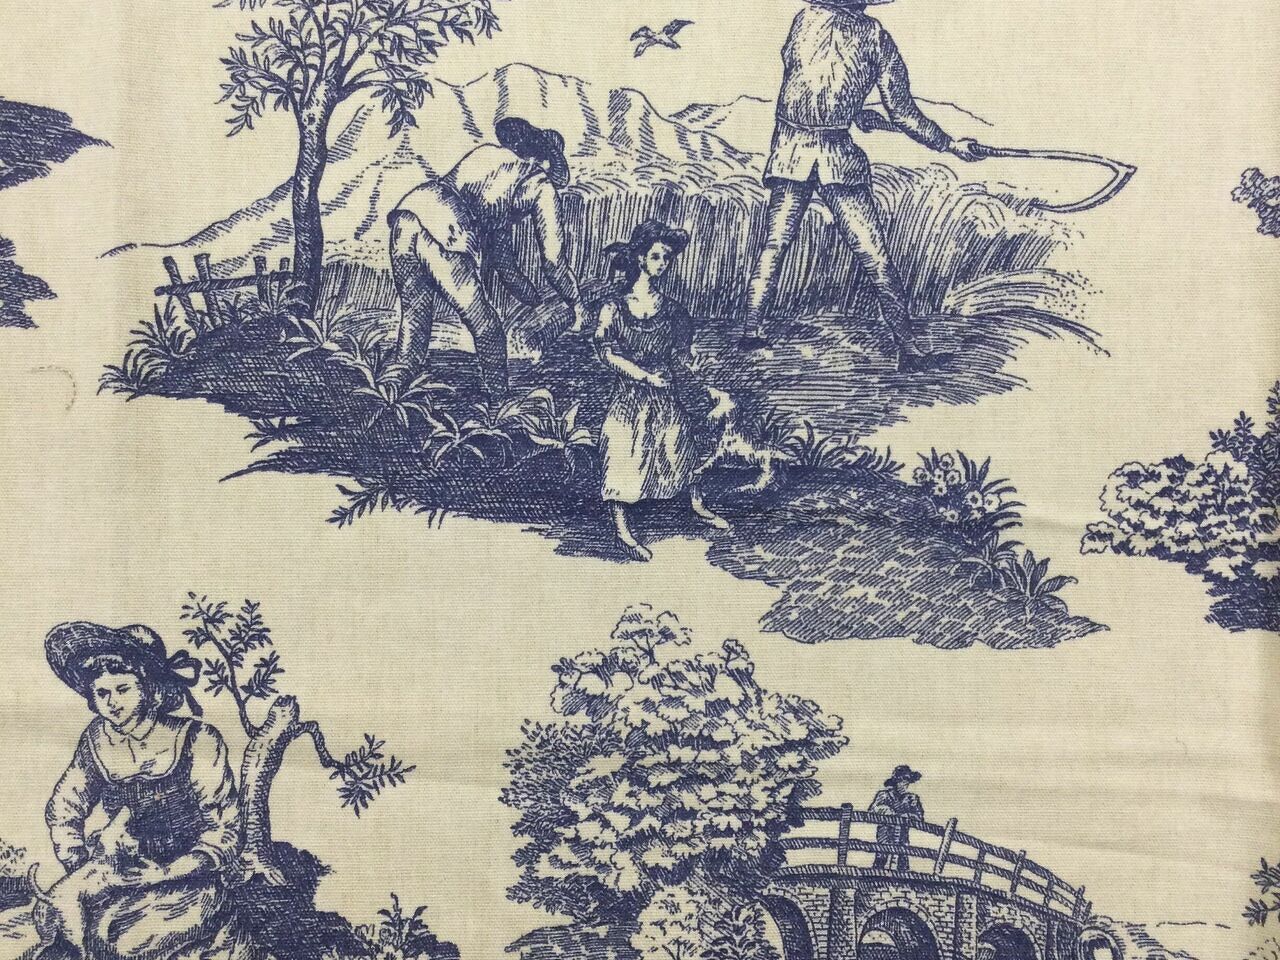 Waverly Toile Blue Charmed Rustic Life Fabric by the Yard 